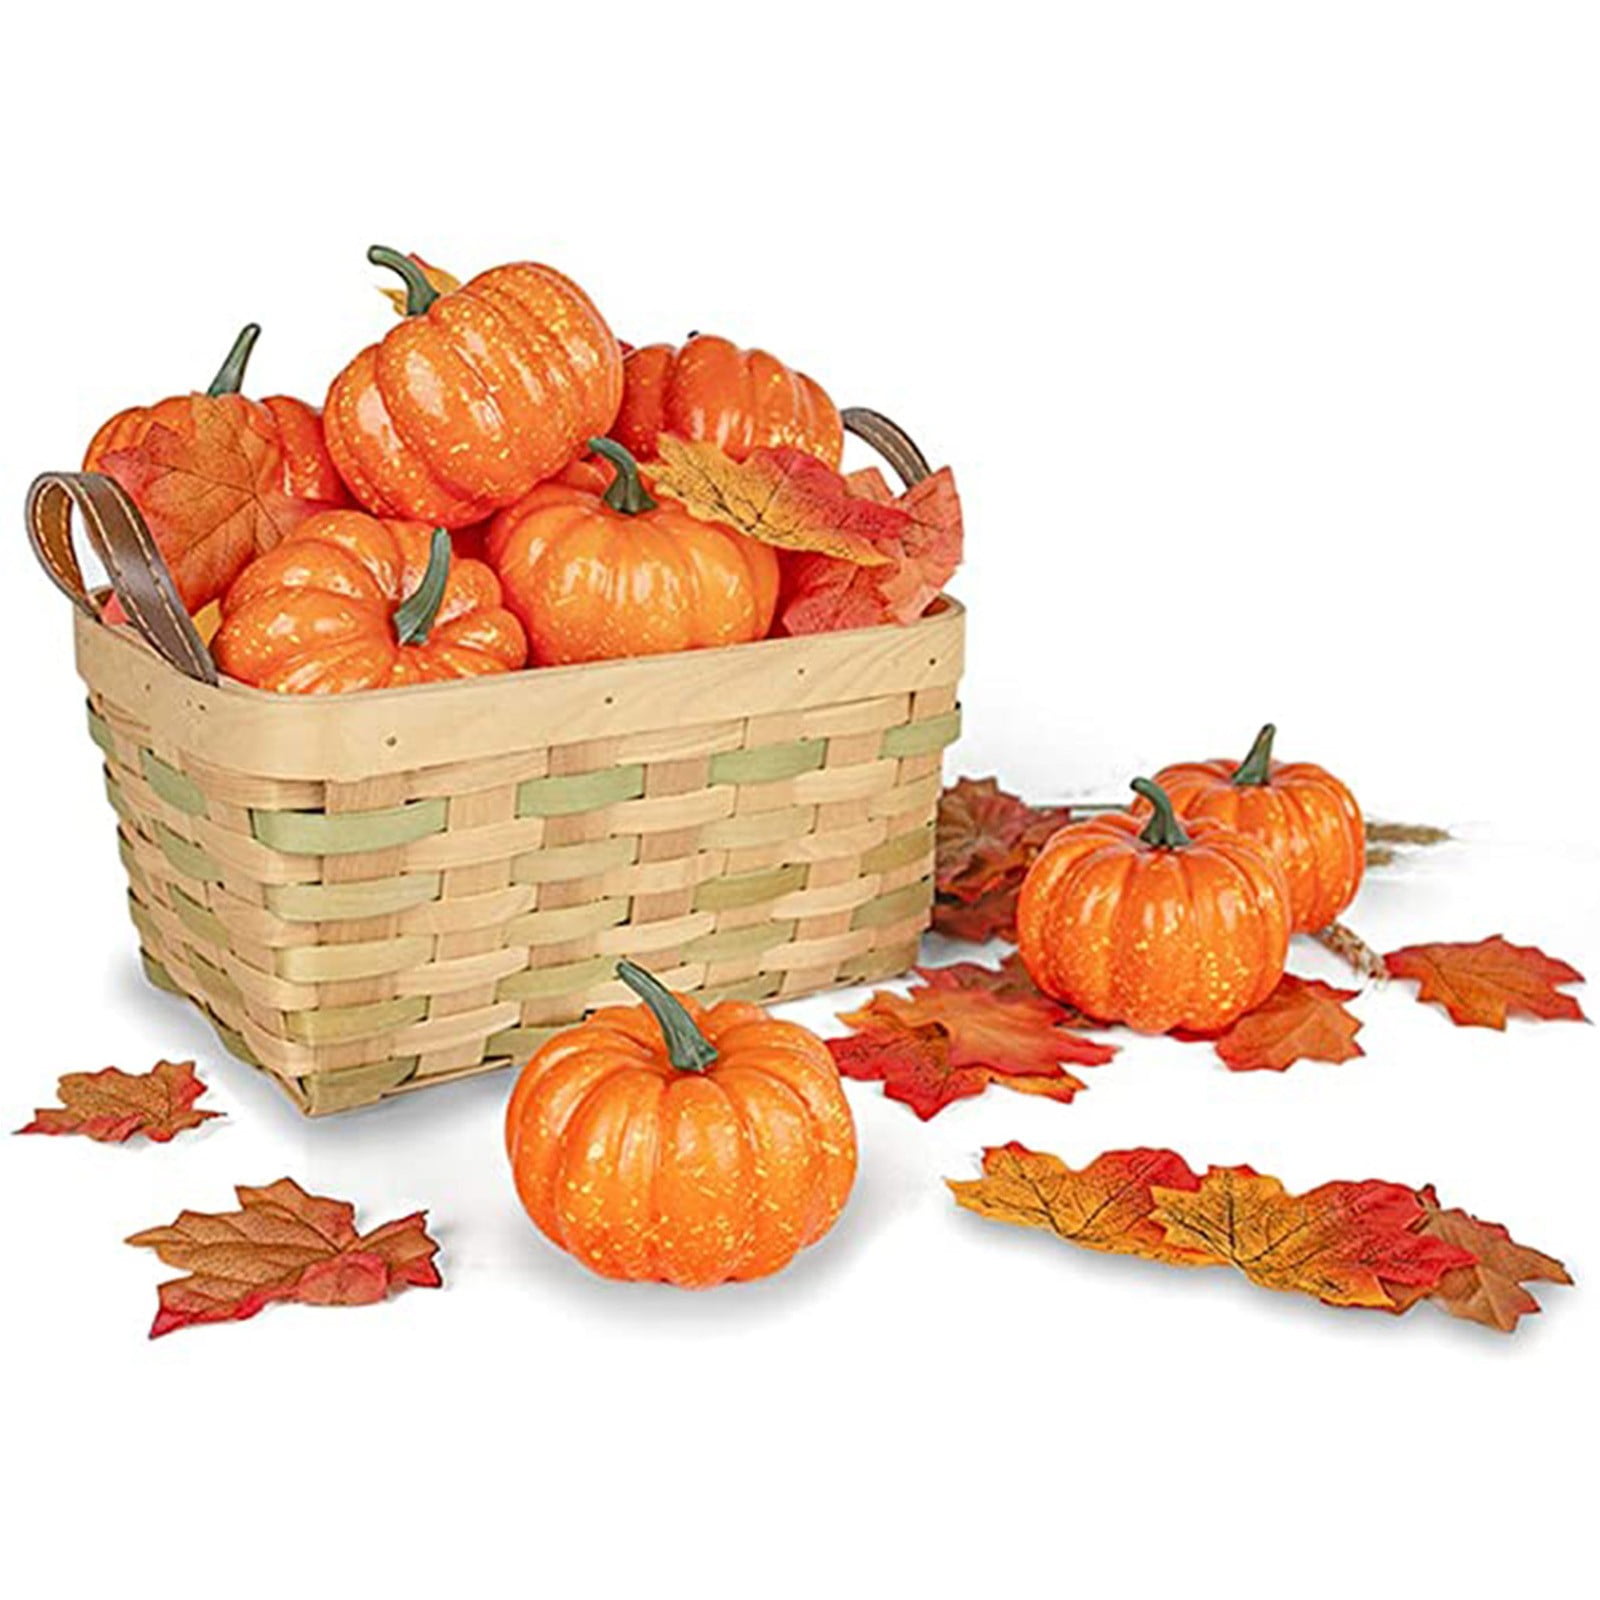 POPLAY 14 PCS Artificial Lifelike Simulation Mixed Pumpkins Fake Pumpkins with 30PCS Fake Maple Leaves Festival Thanksgiving Fall Harvest Home Decoration